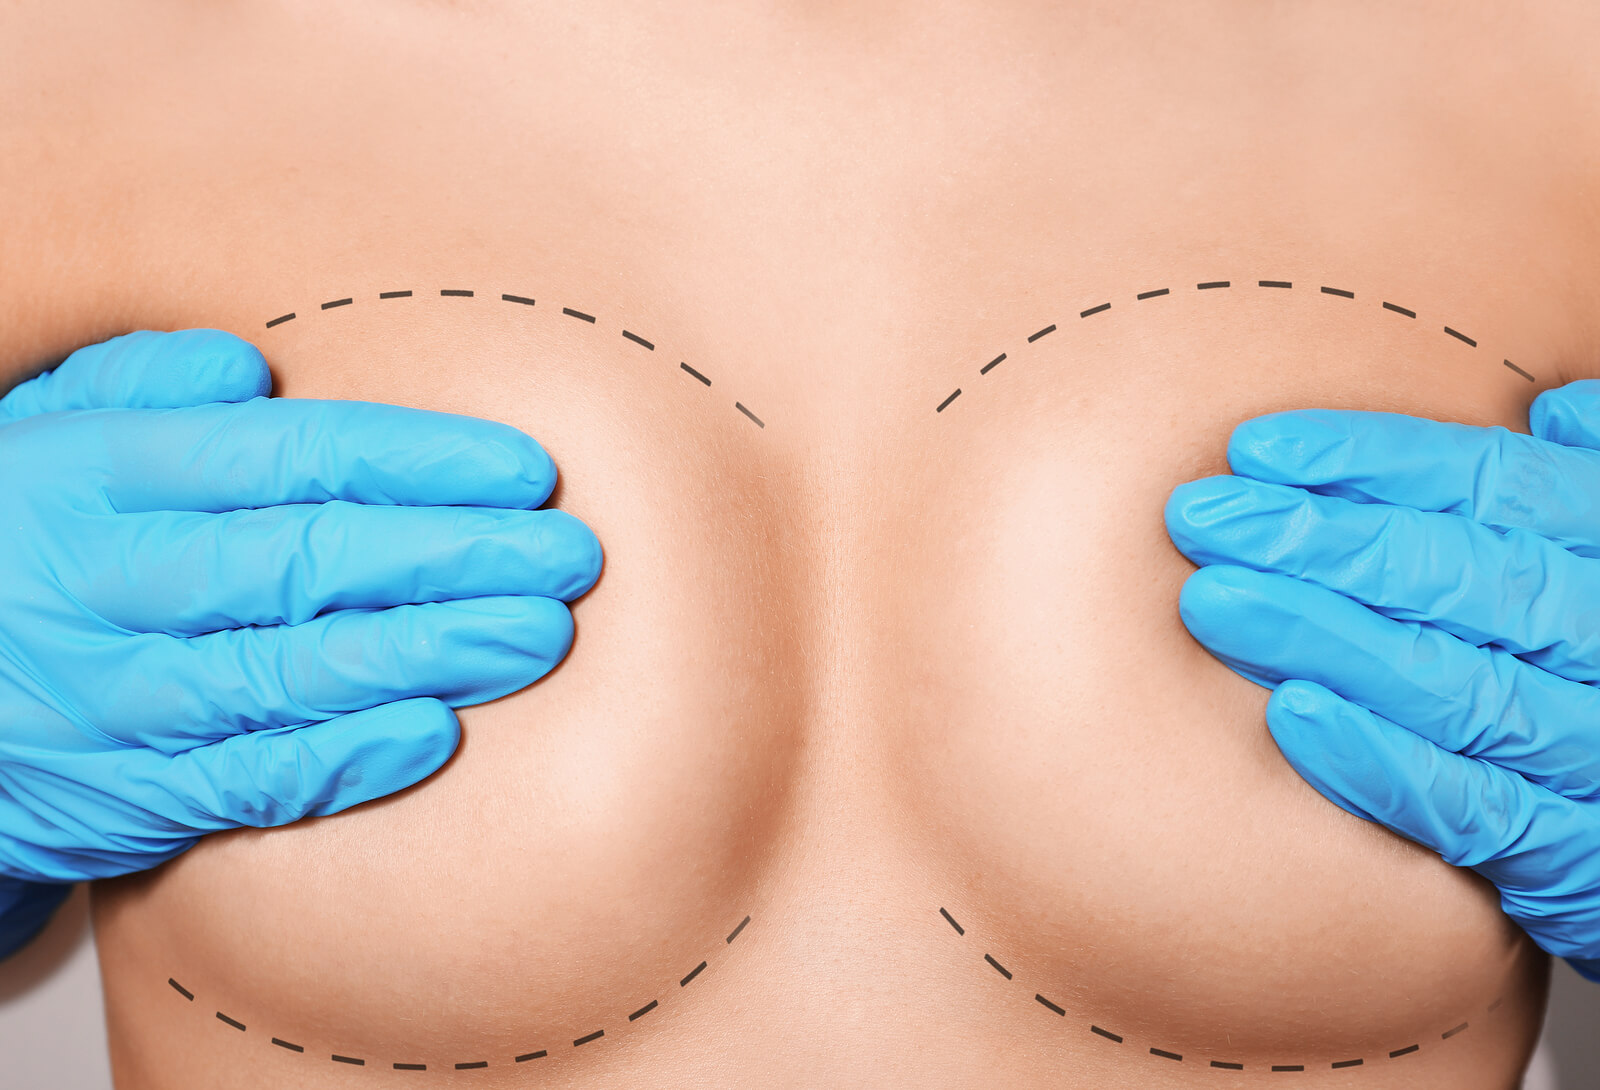 Non Surgical Breast Lift - Medical Injectables